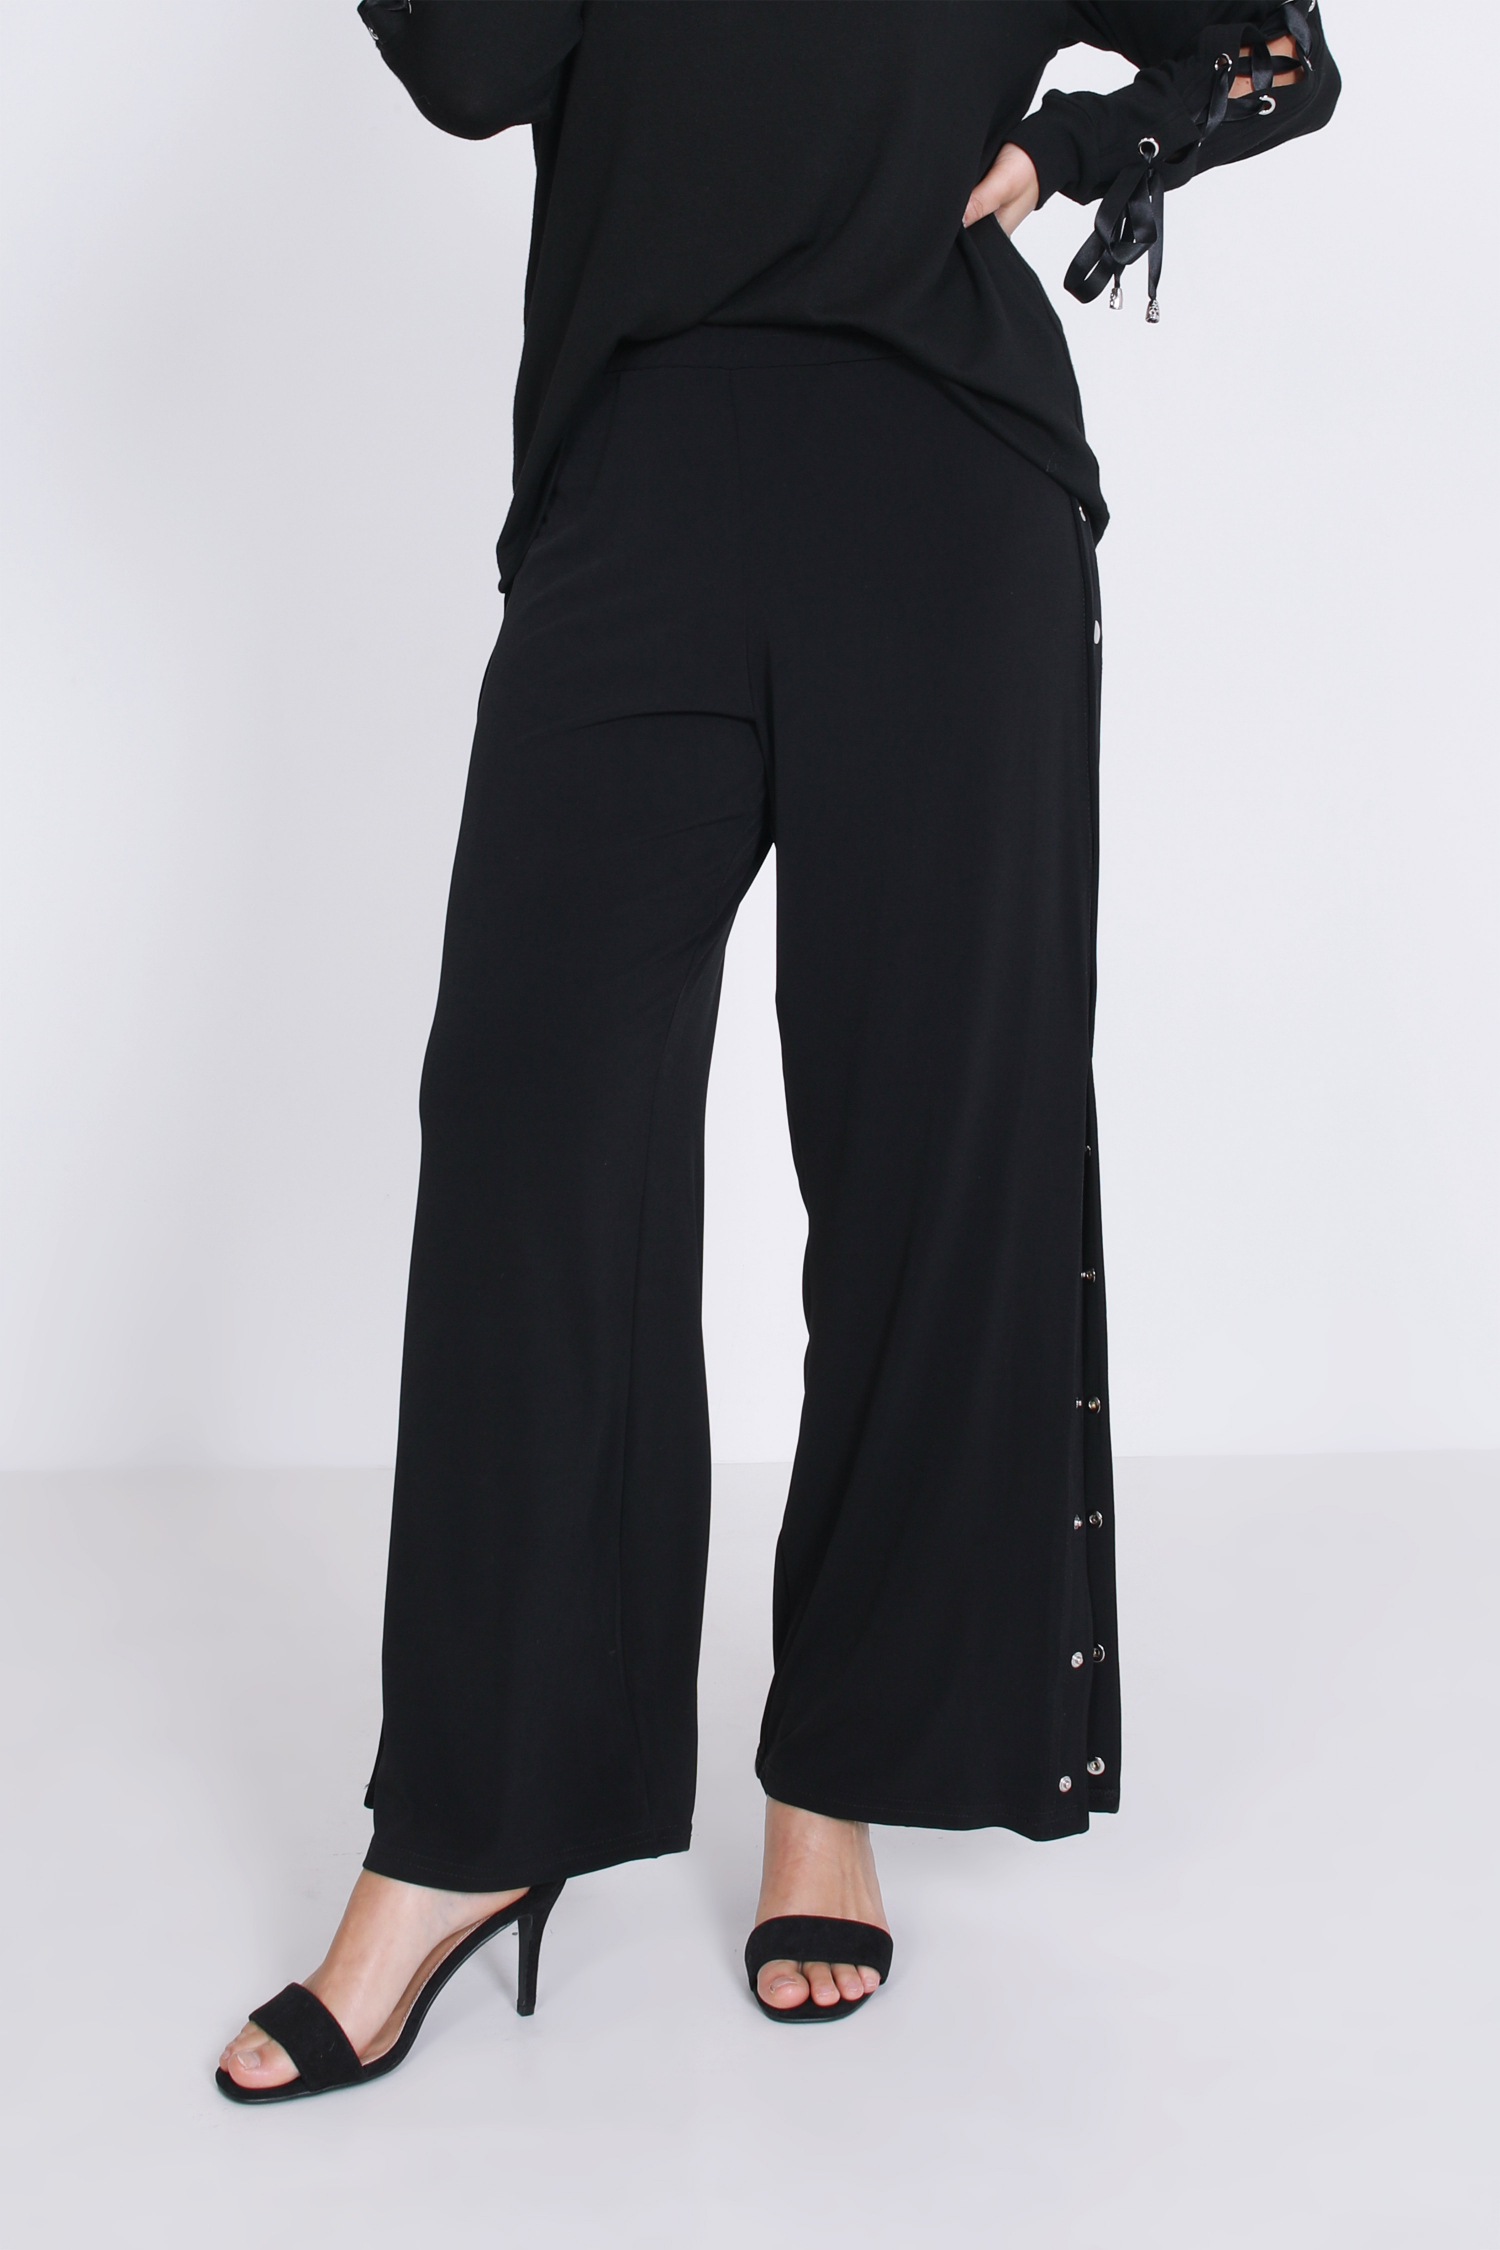 Plain knit pants with side pressure